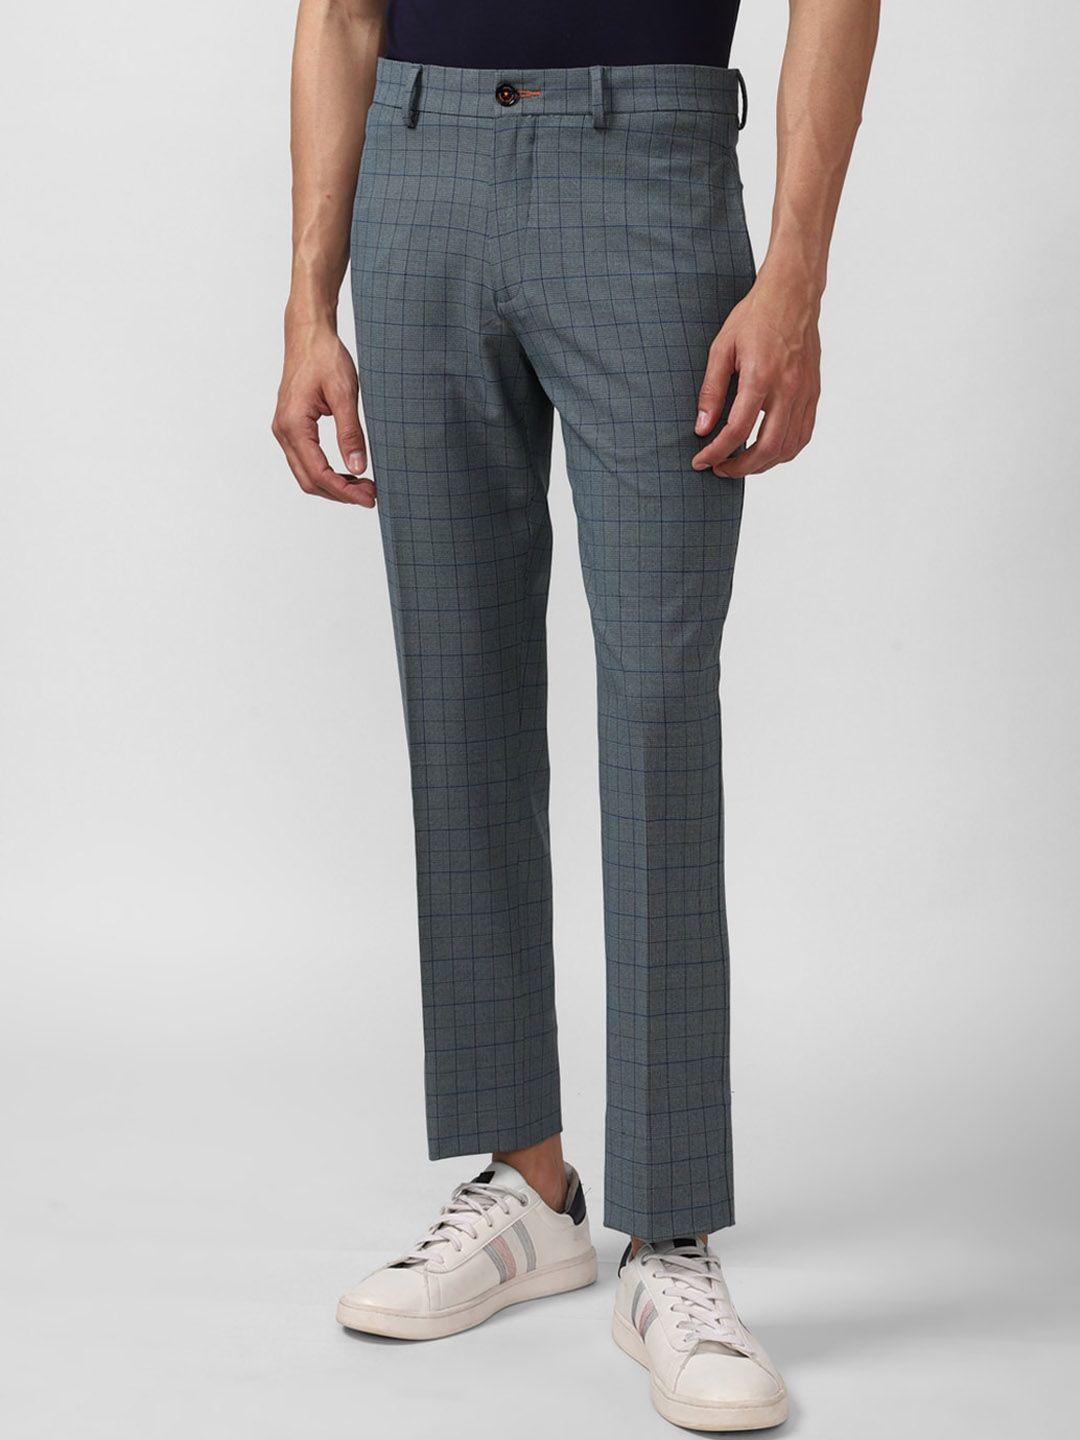 simon-carter-london-men-grey-checked-slim-fit-chinos-trousers